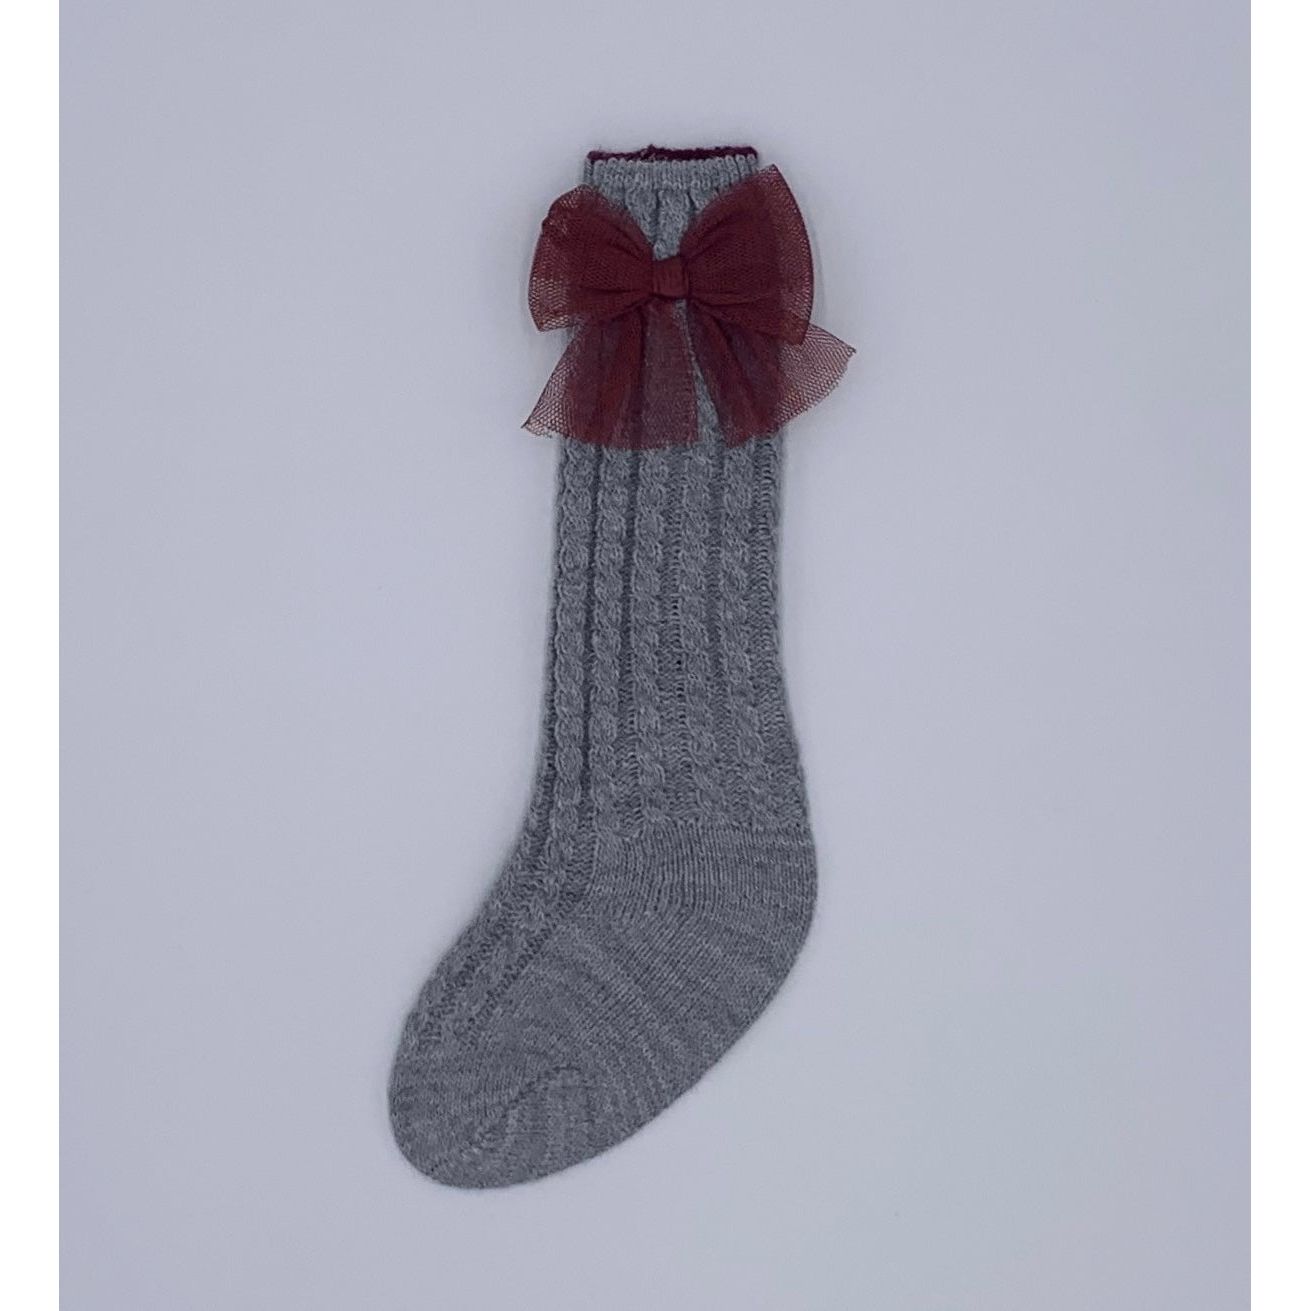 Grey Knitted Socks With Burgundy Tulle Bow 3257 - Lala Kids 